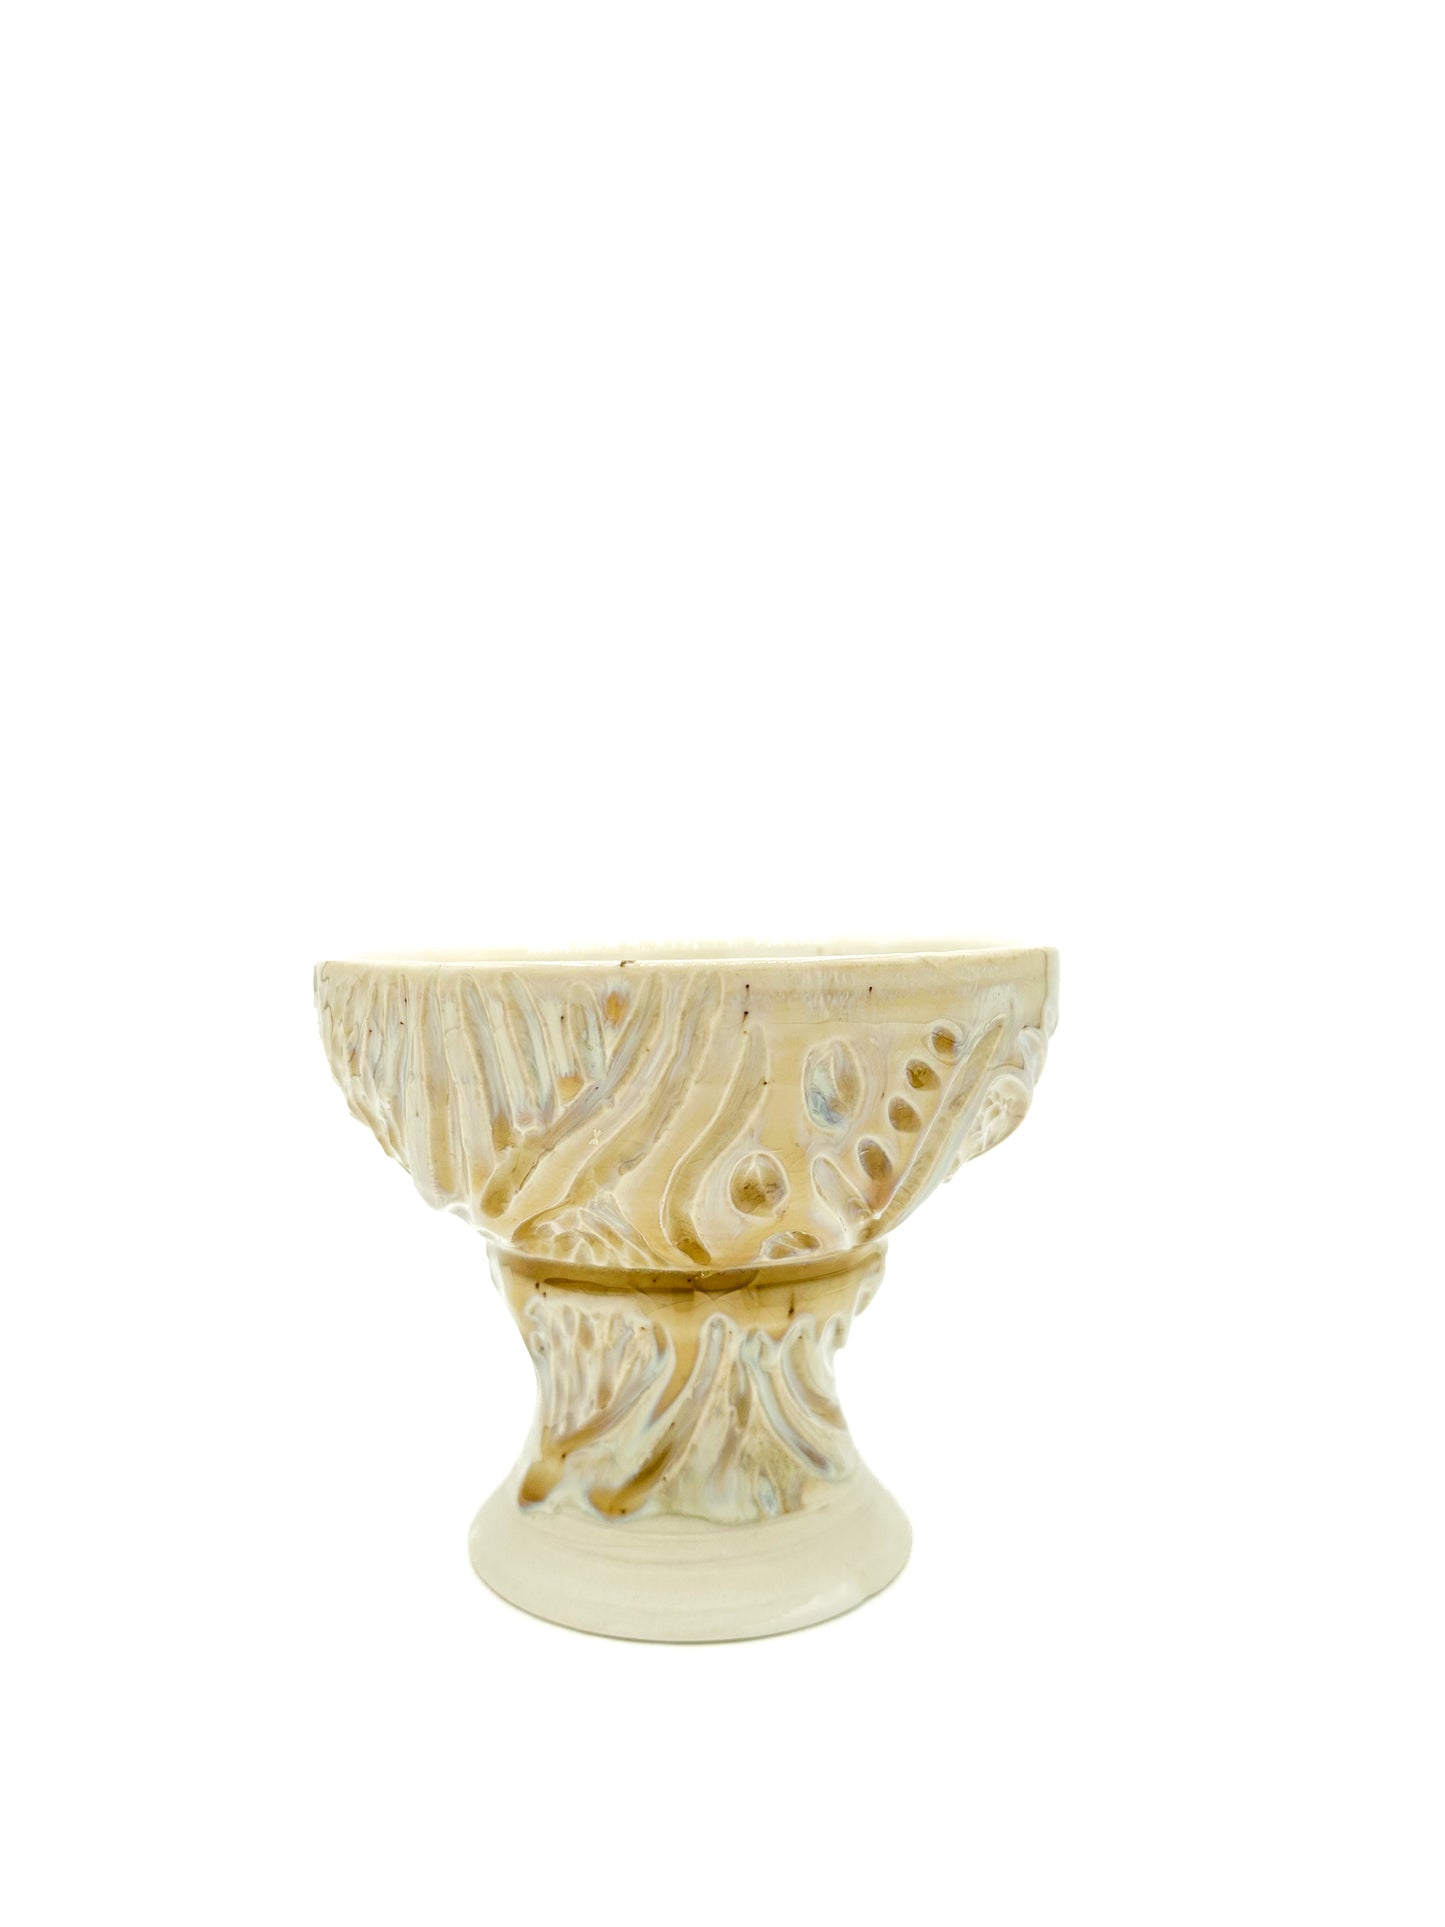 A Drink Well Collection : Iridescent Carved Footed Dish